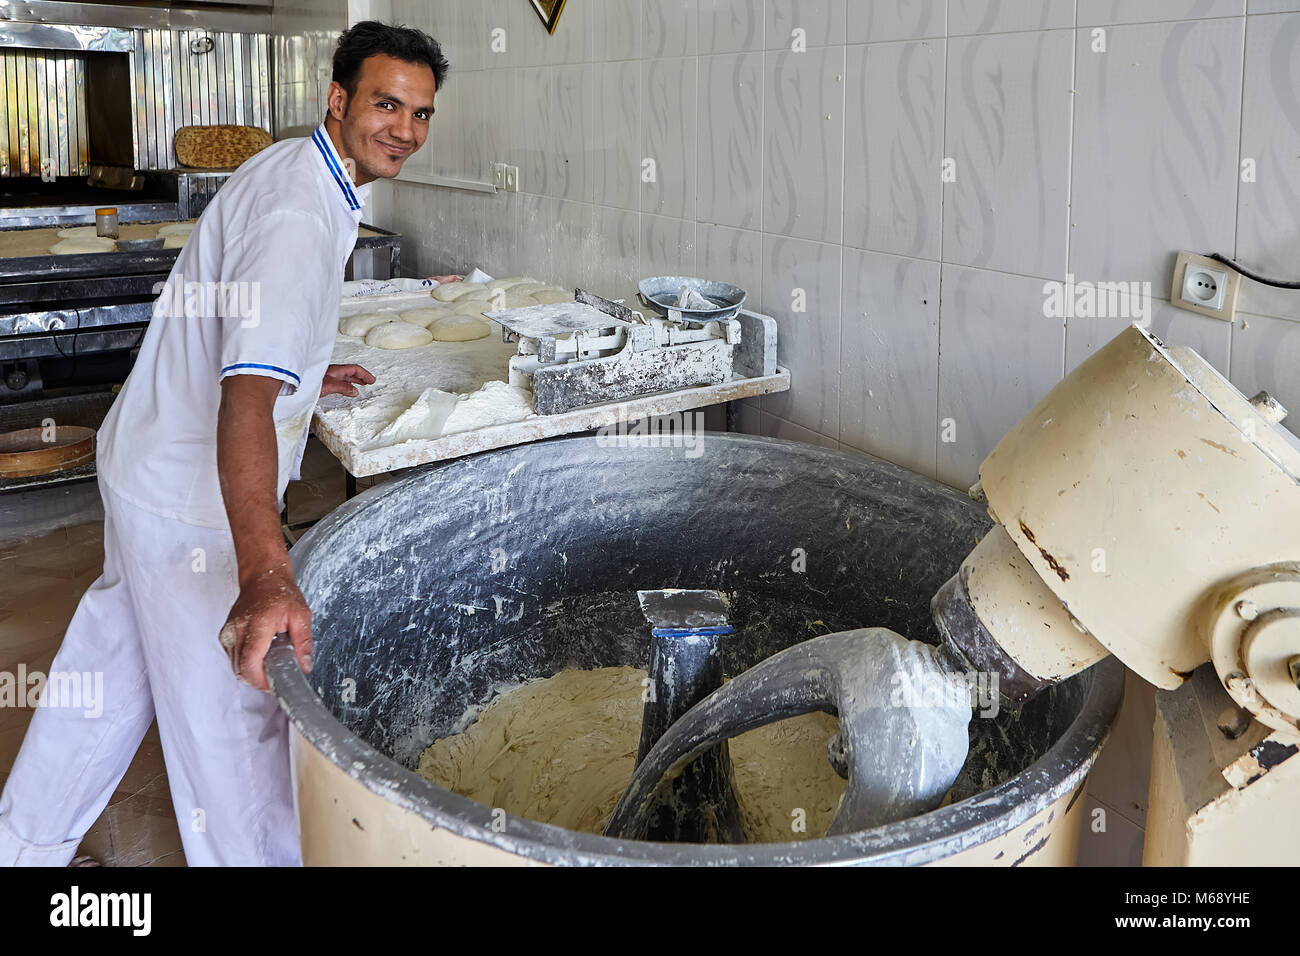 Kashan, Iran - April 27, 2017: A young Baker mixes a dough for an Iranian flat bread called barbari in his bakery using a kneading machine. Stock Photo